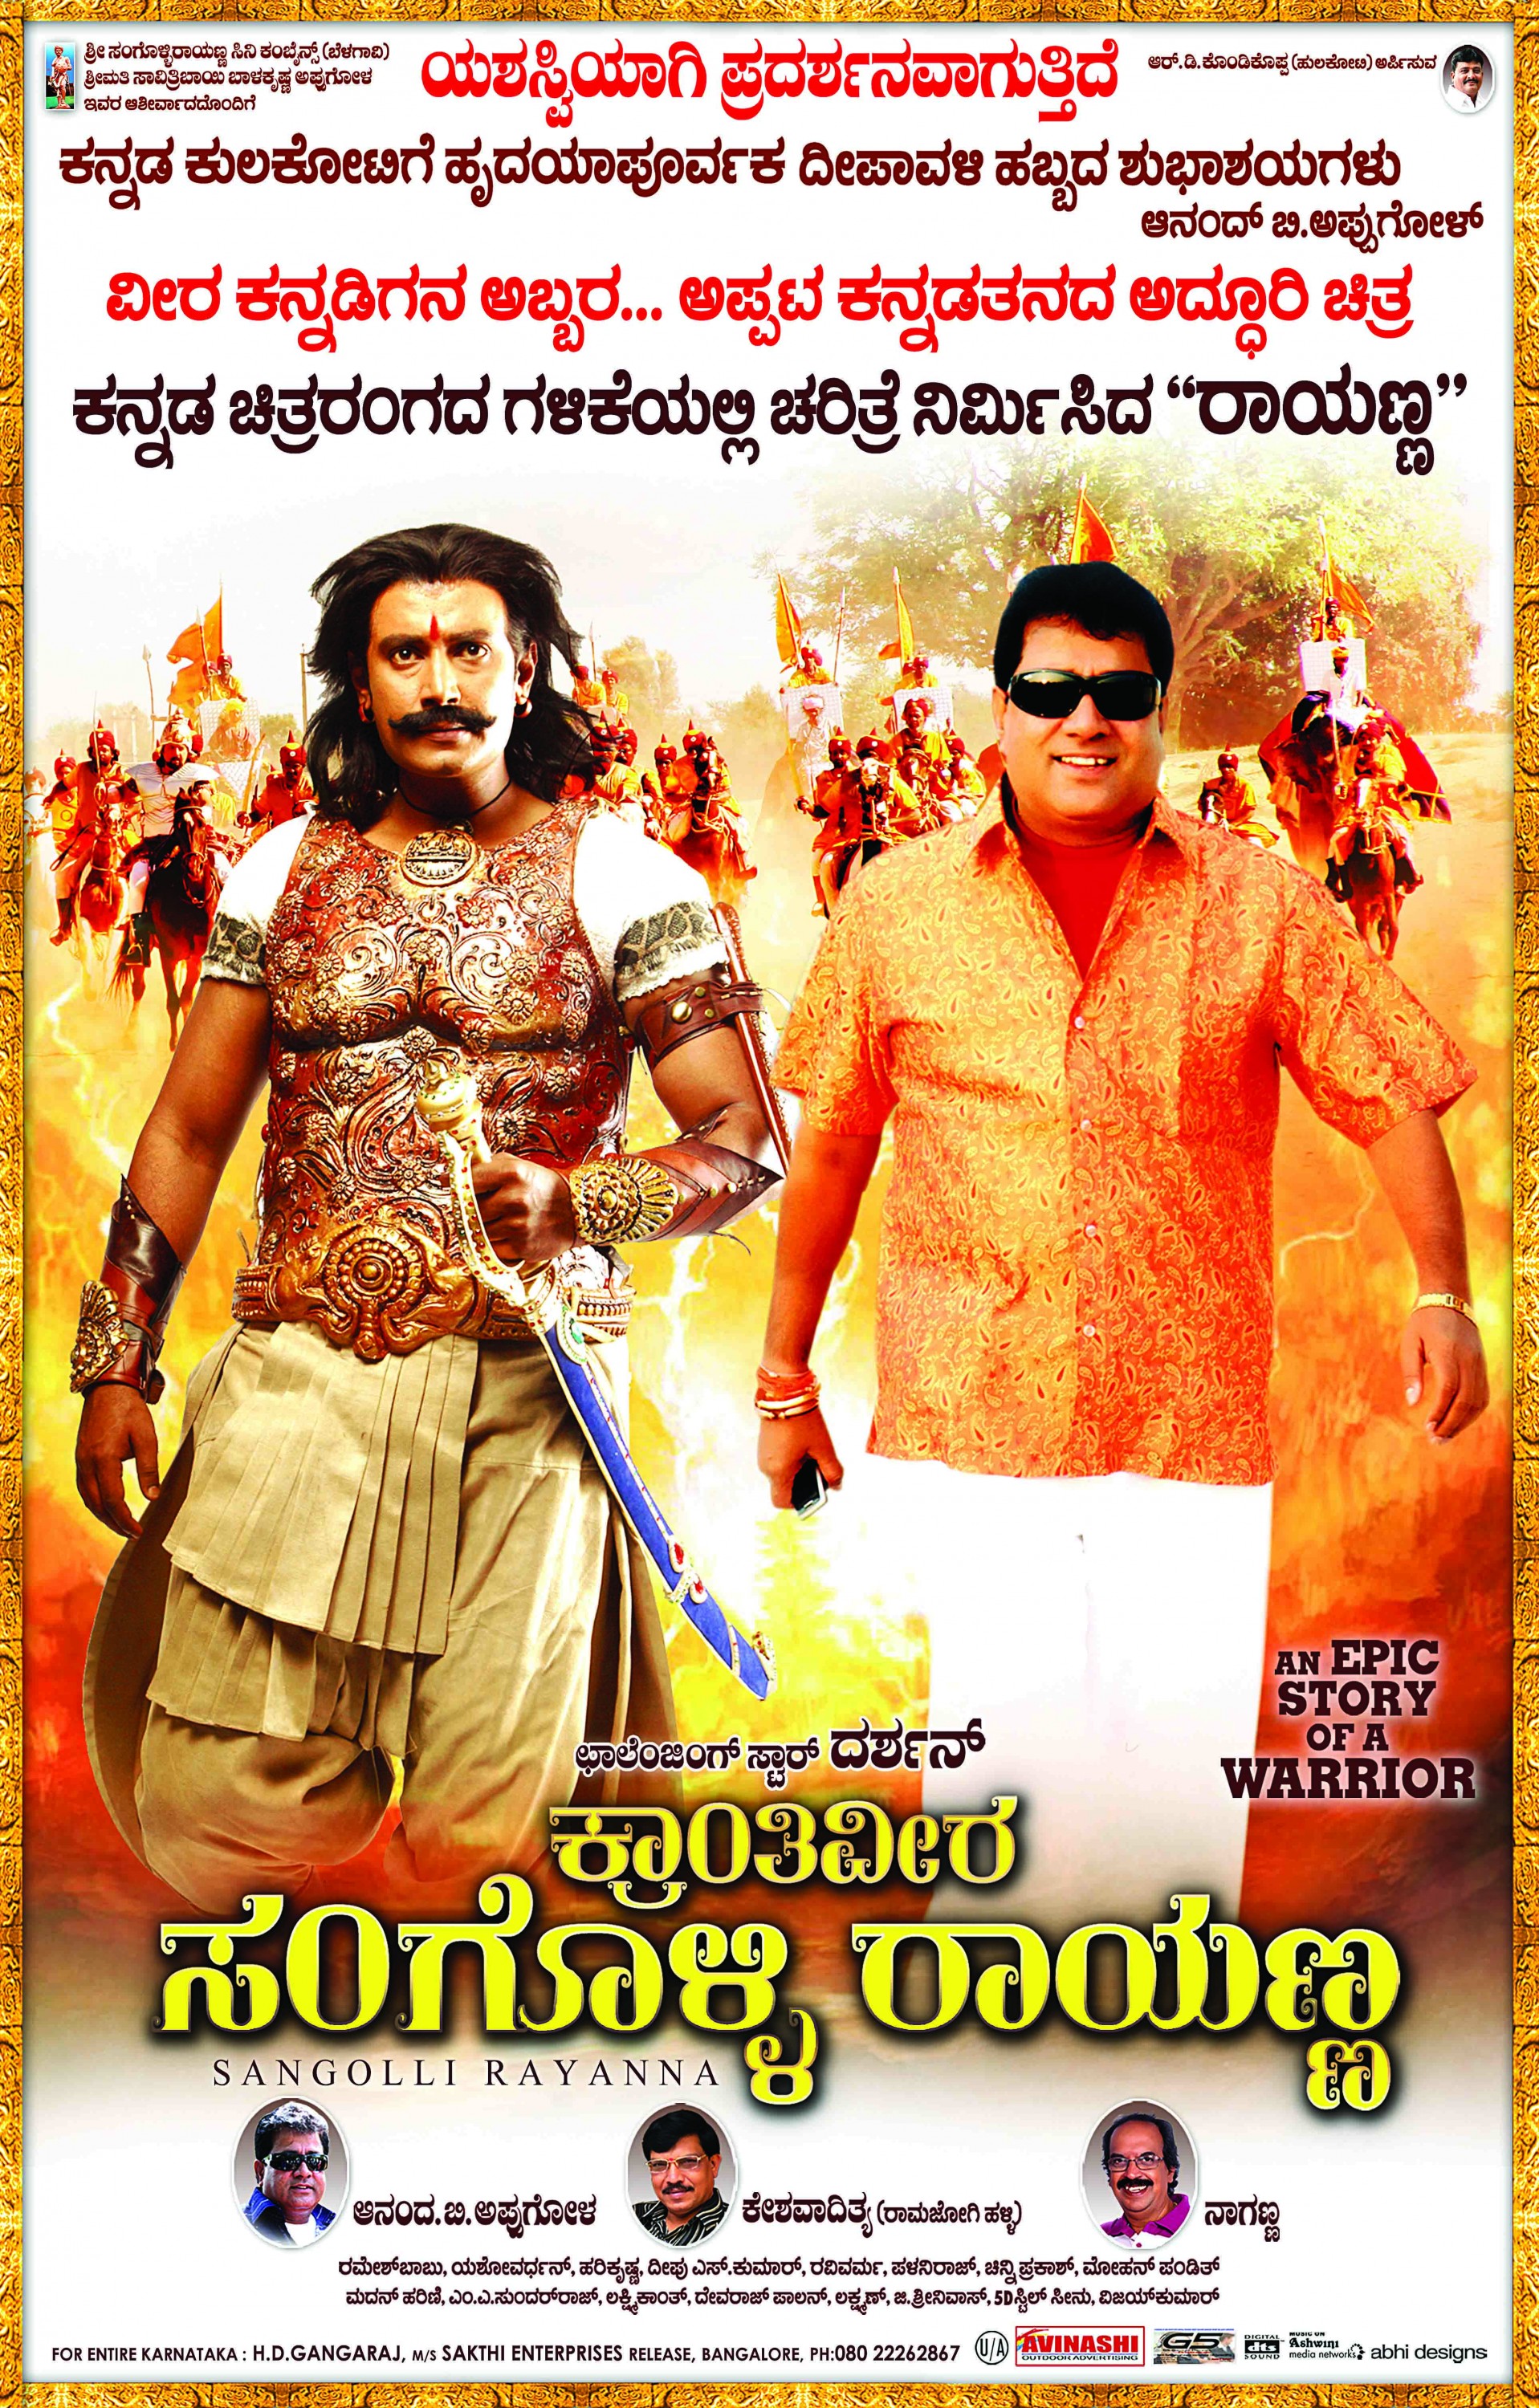 Mega Sized Movie Poster Image for Sangolli Rayanna (#54 of 79)